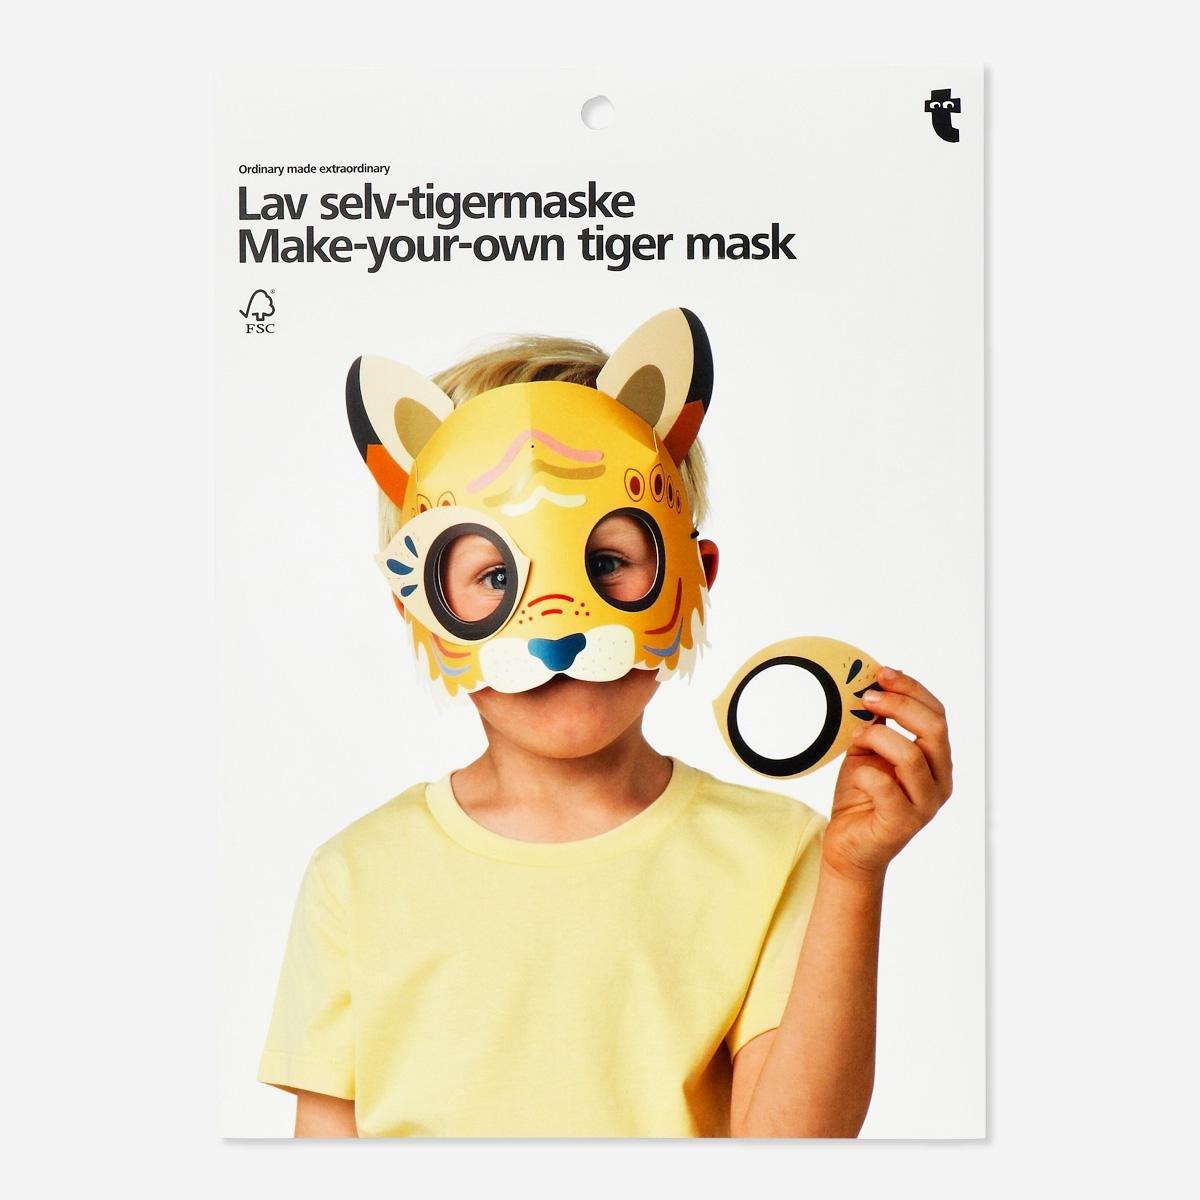 Multicolour make-your-own tiger mask